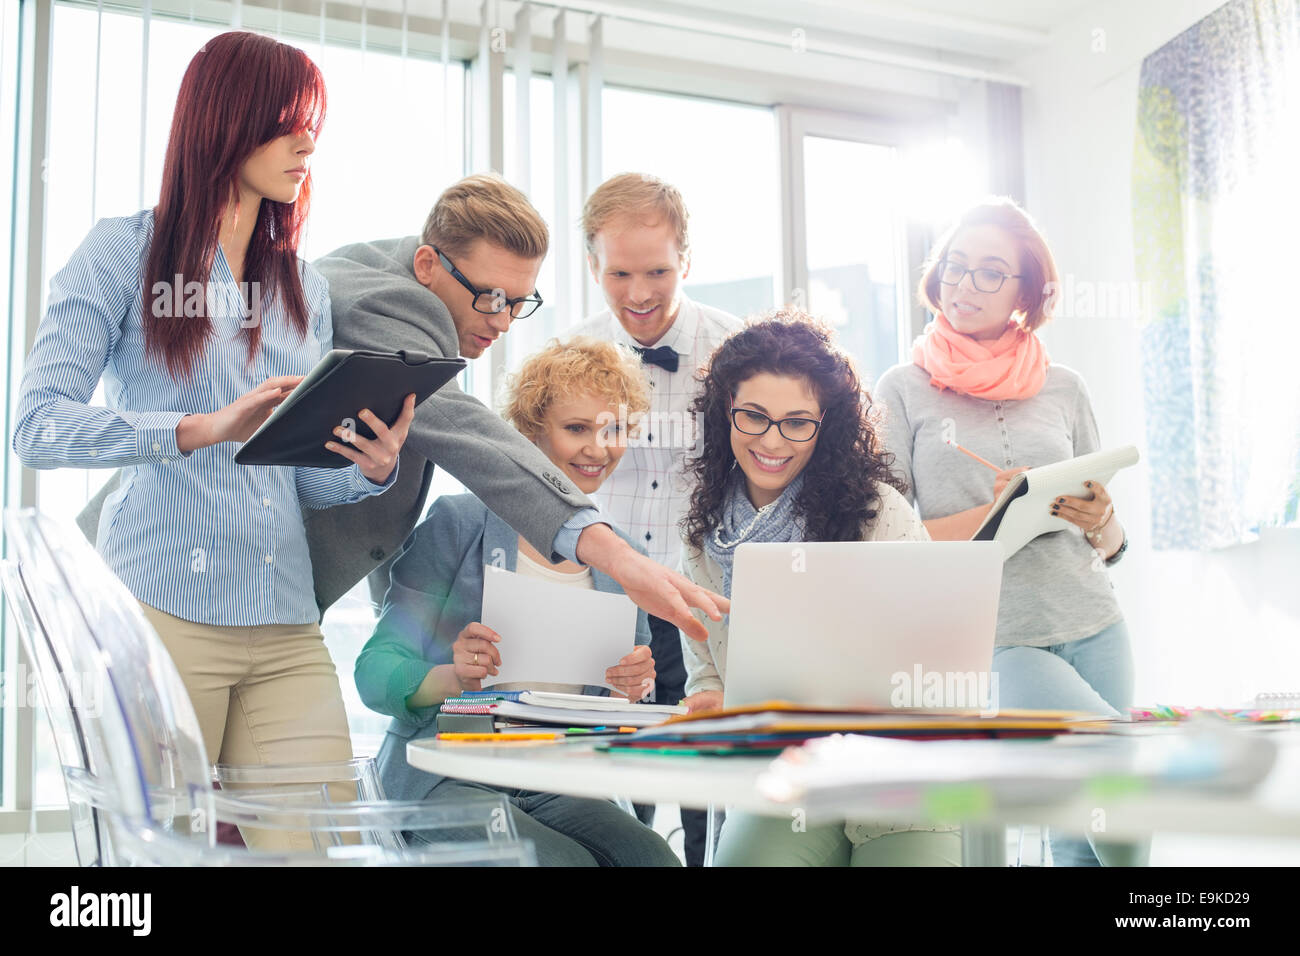 Smiling creative businesspeople working on laptop at desk in office Stock Photo